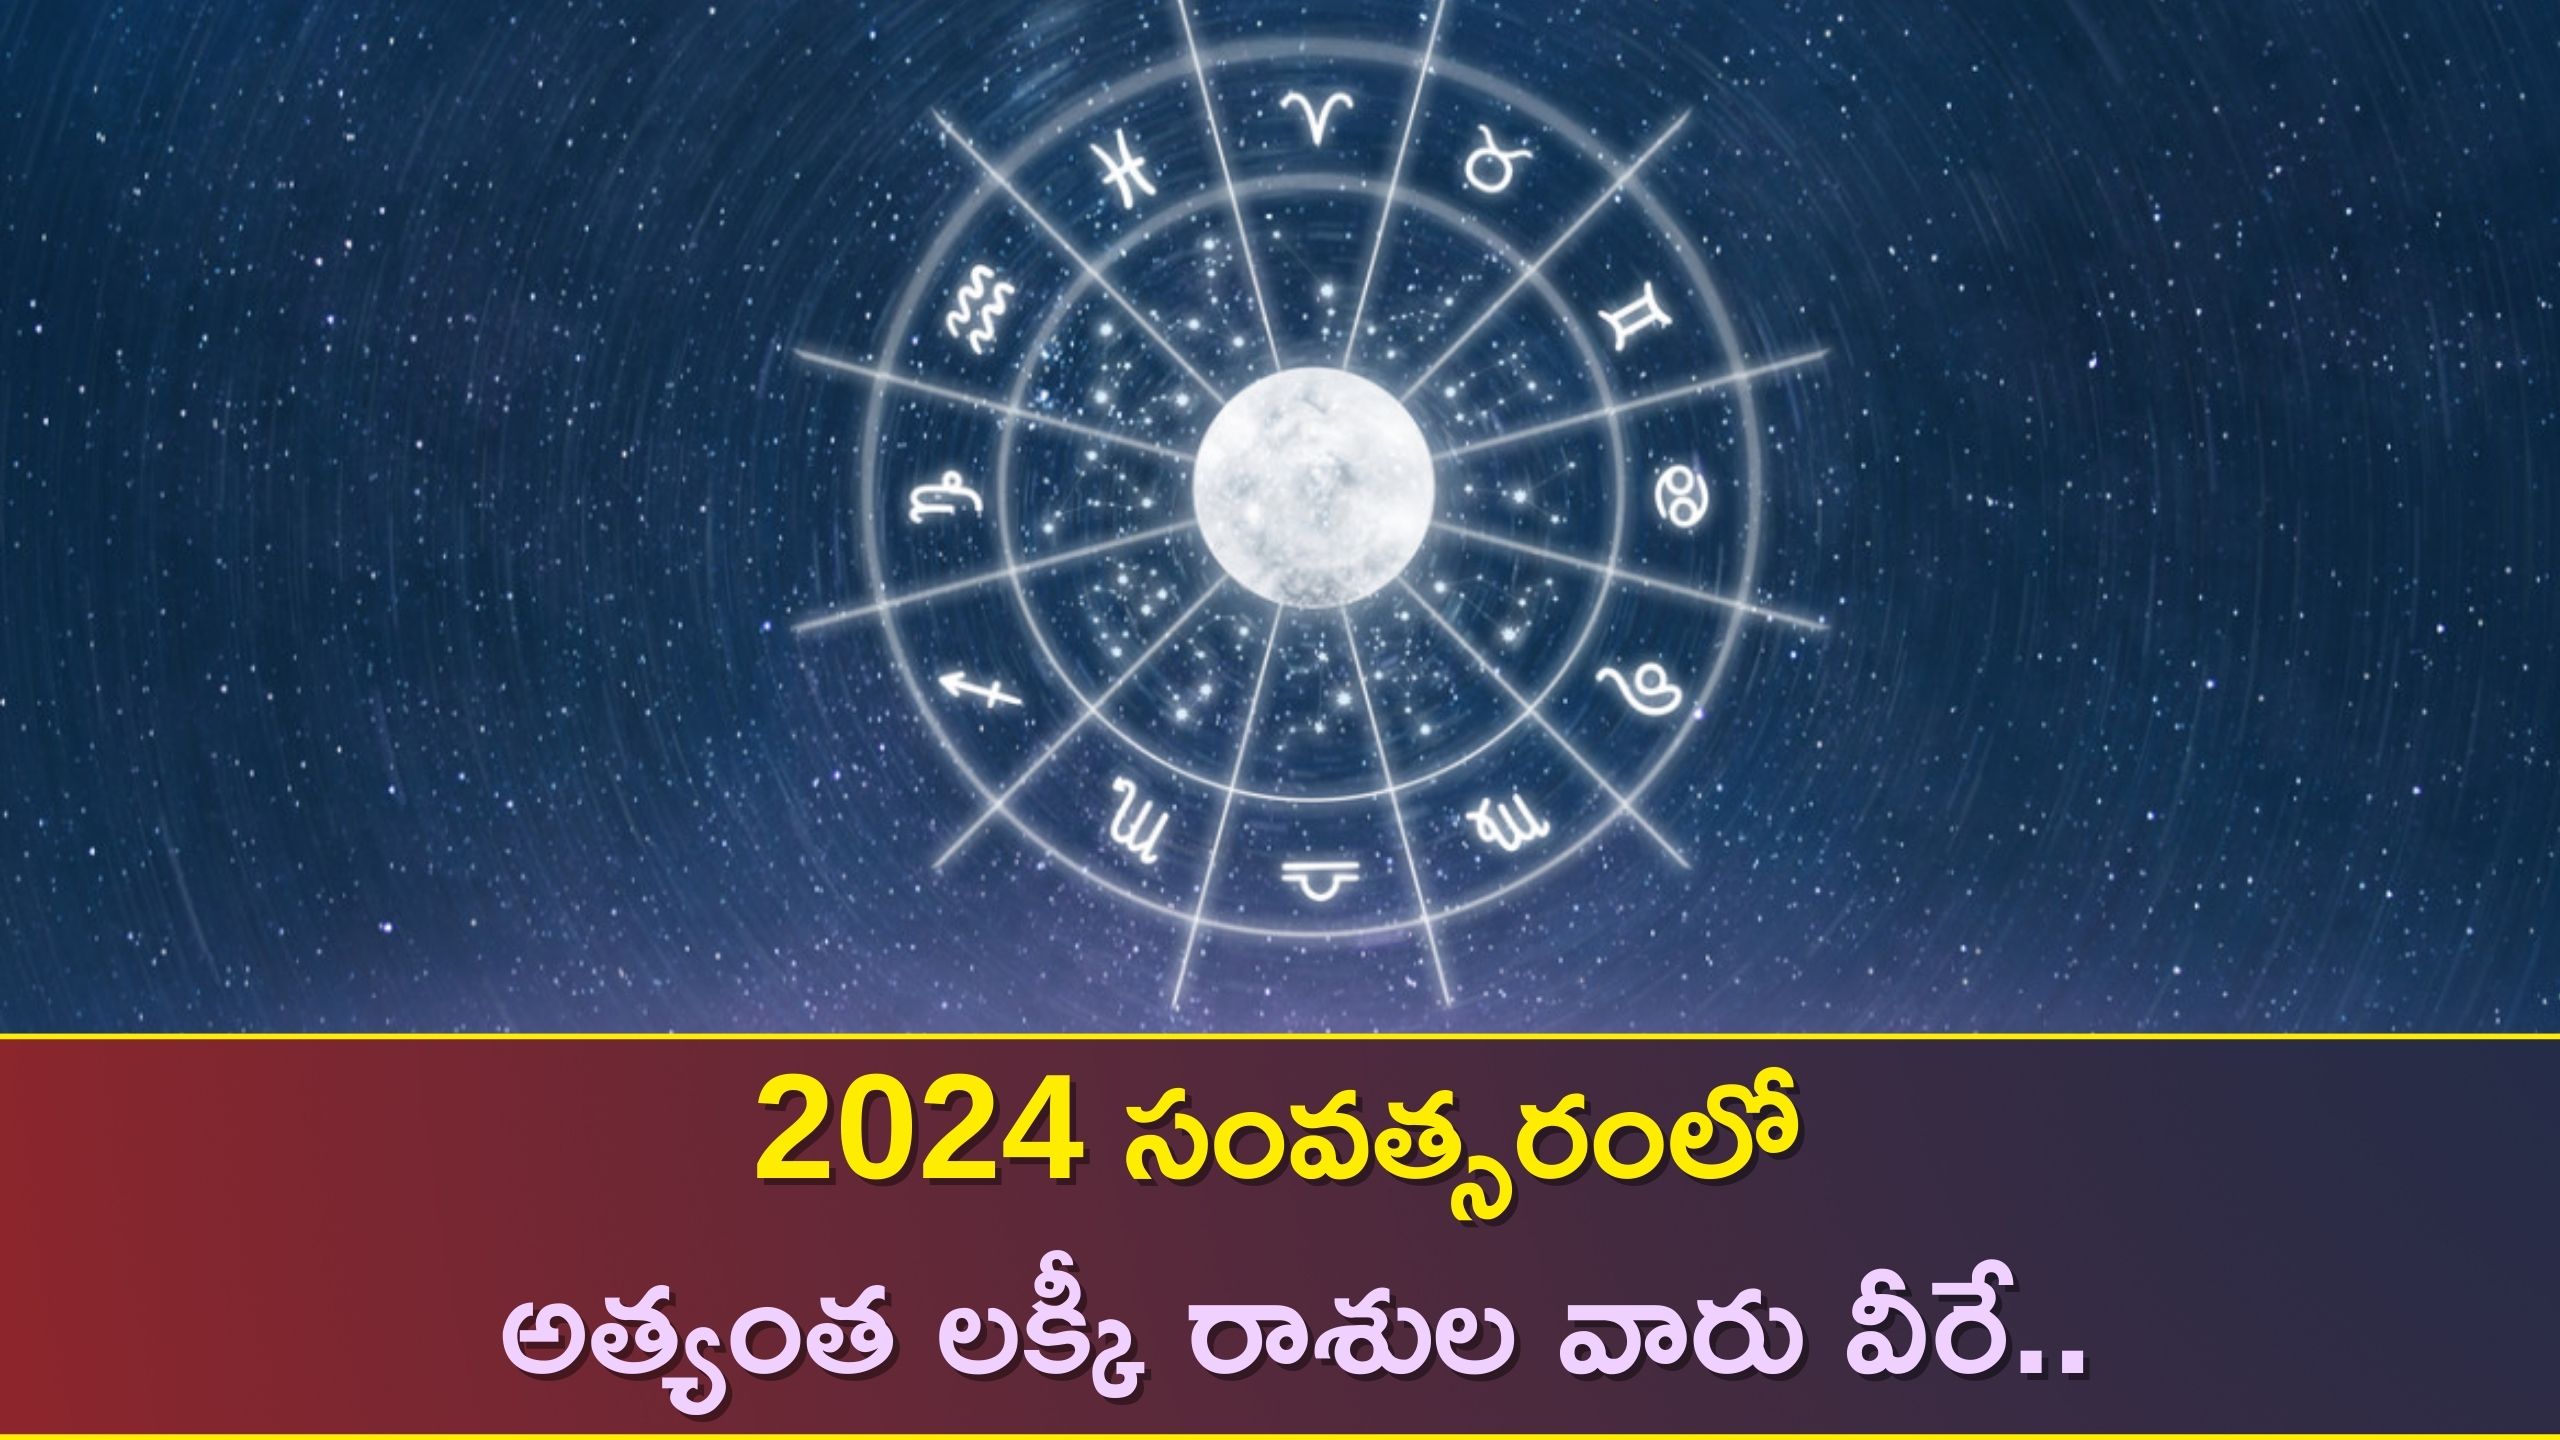 These 3 Are The Luckiest Zodiac Signs In 2024, Is Your Zodiac Sign